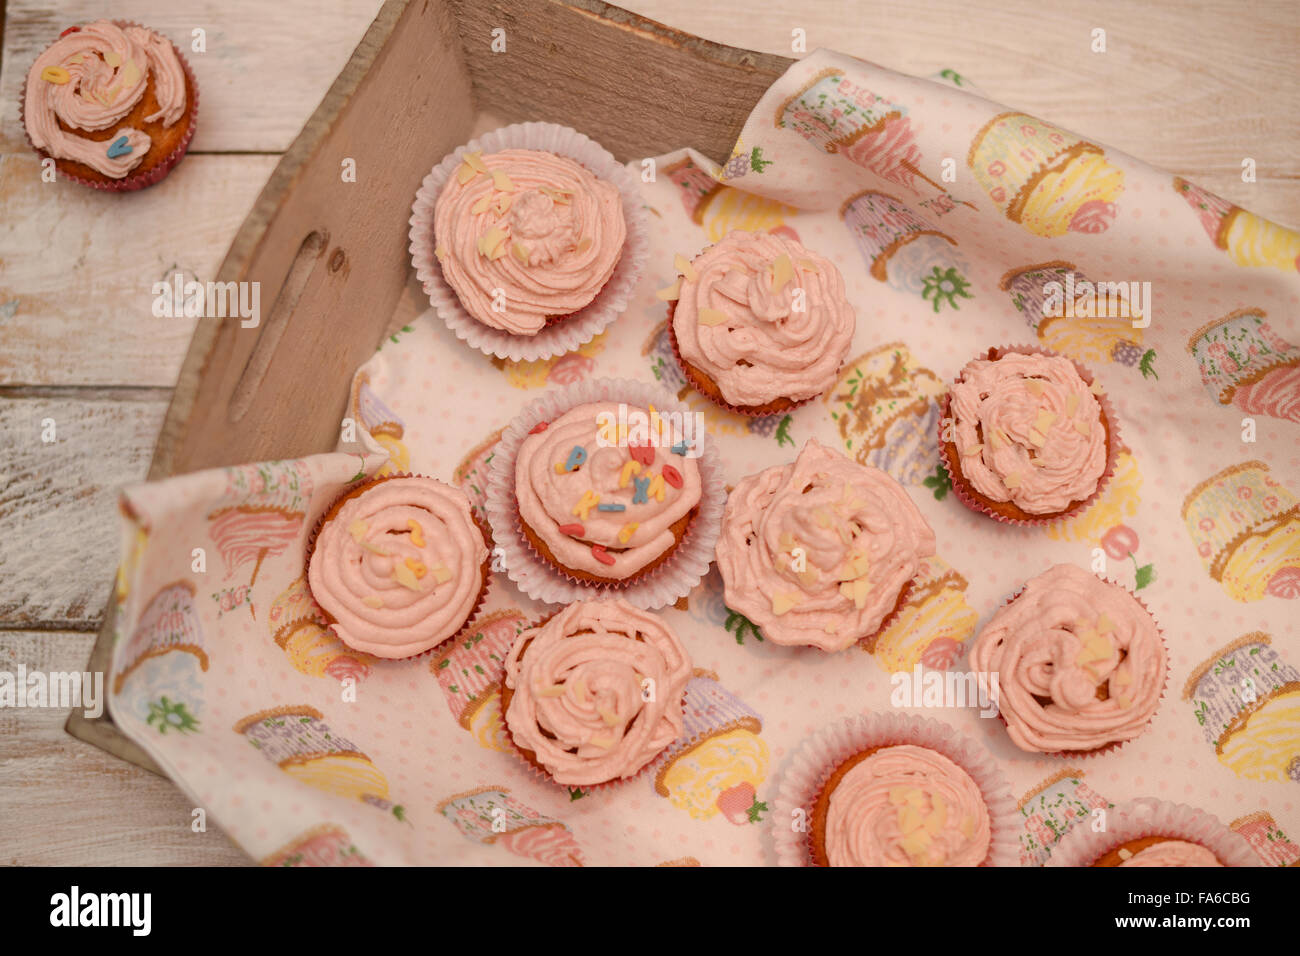 Overhead view of cupcakes on a tray Stock Photo